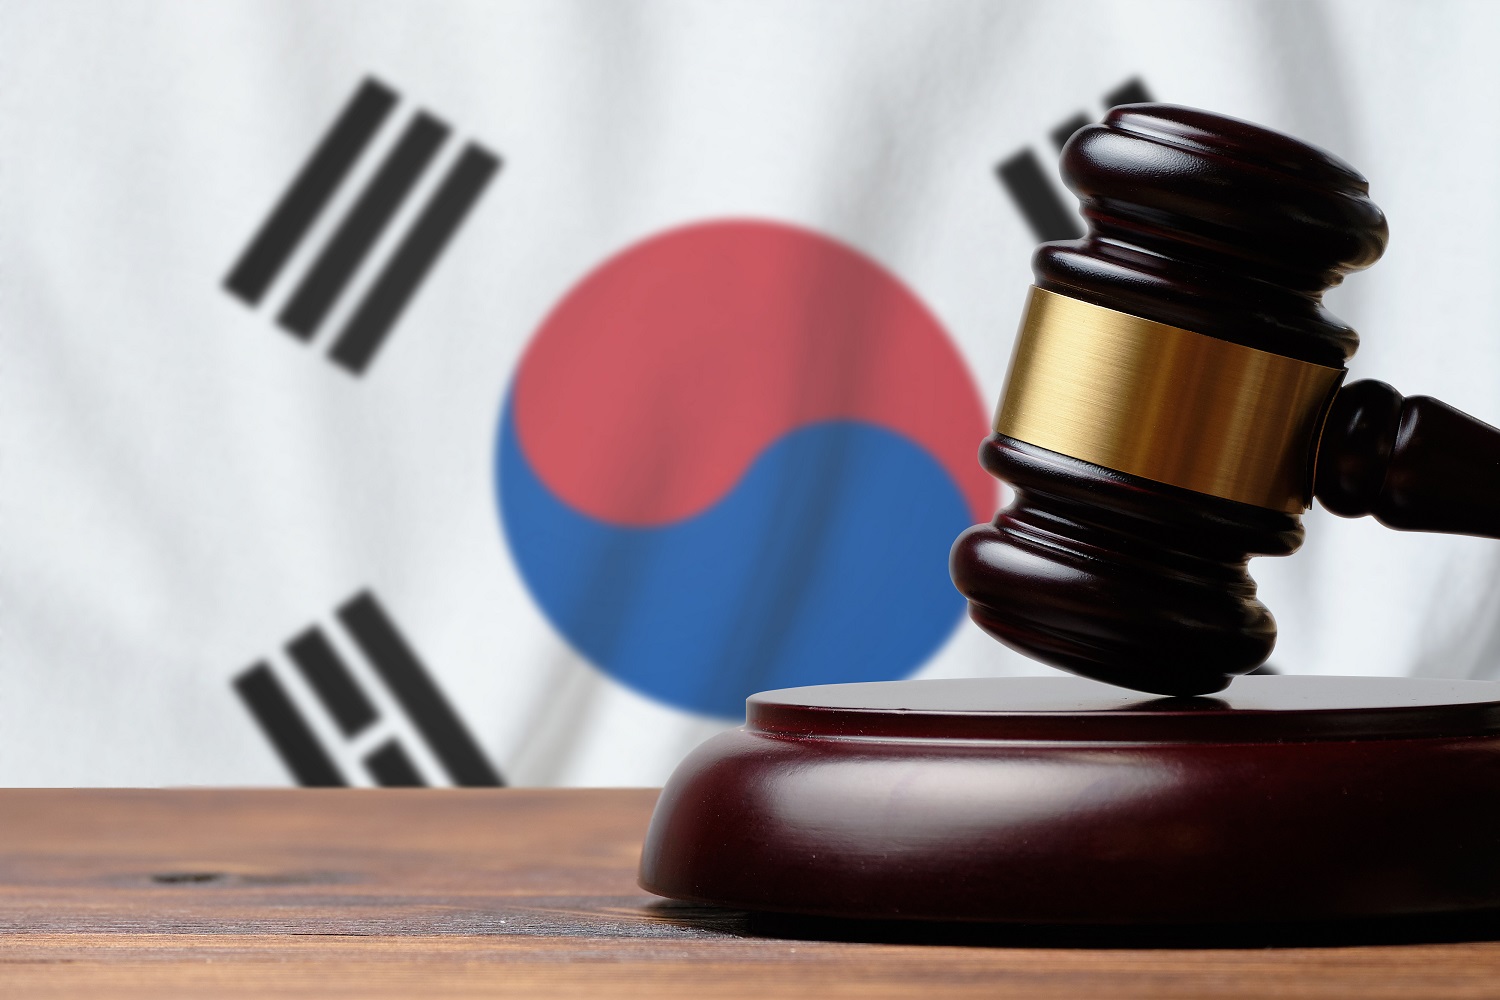 A gavel and block on a wooden desk against the background of a South Korean flag.